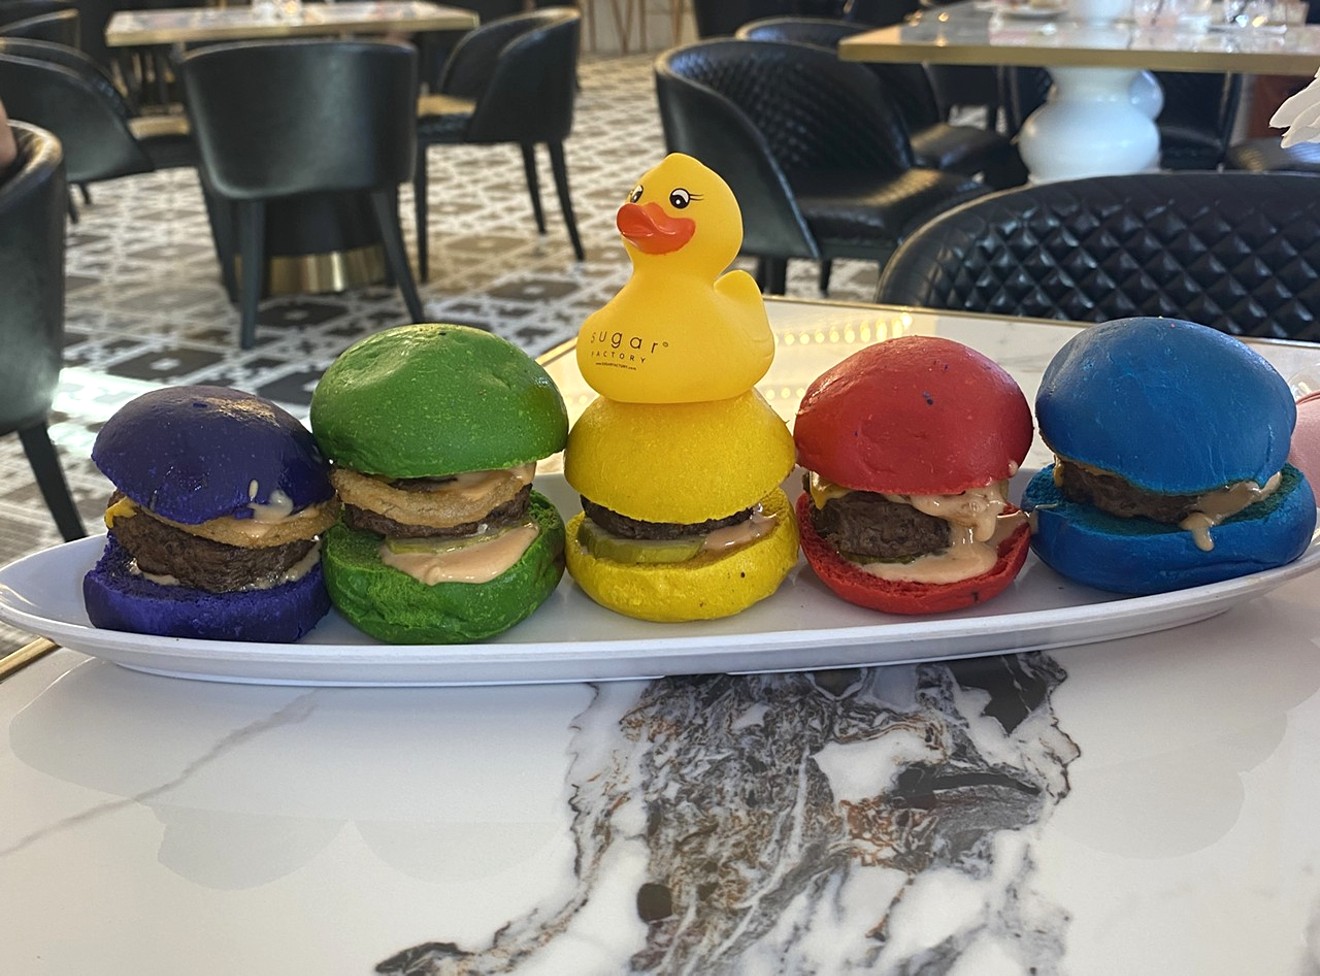 Sugar Factory in Glendale is a fun spot for a celebratory meal. The Rainbow Sliders even come with a gift as diners can keep the duck as a souvenir.